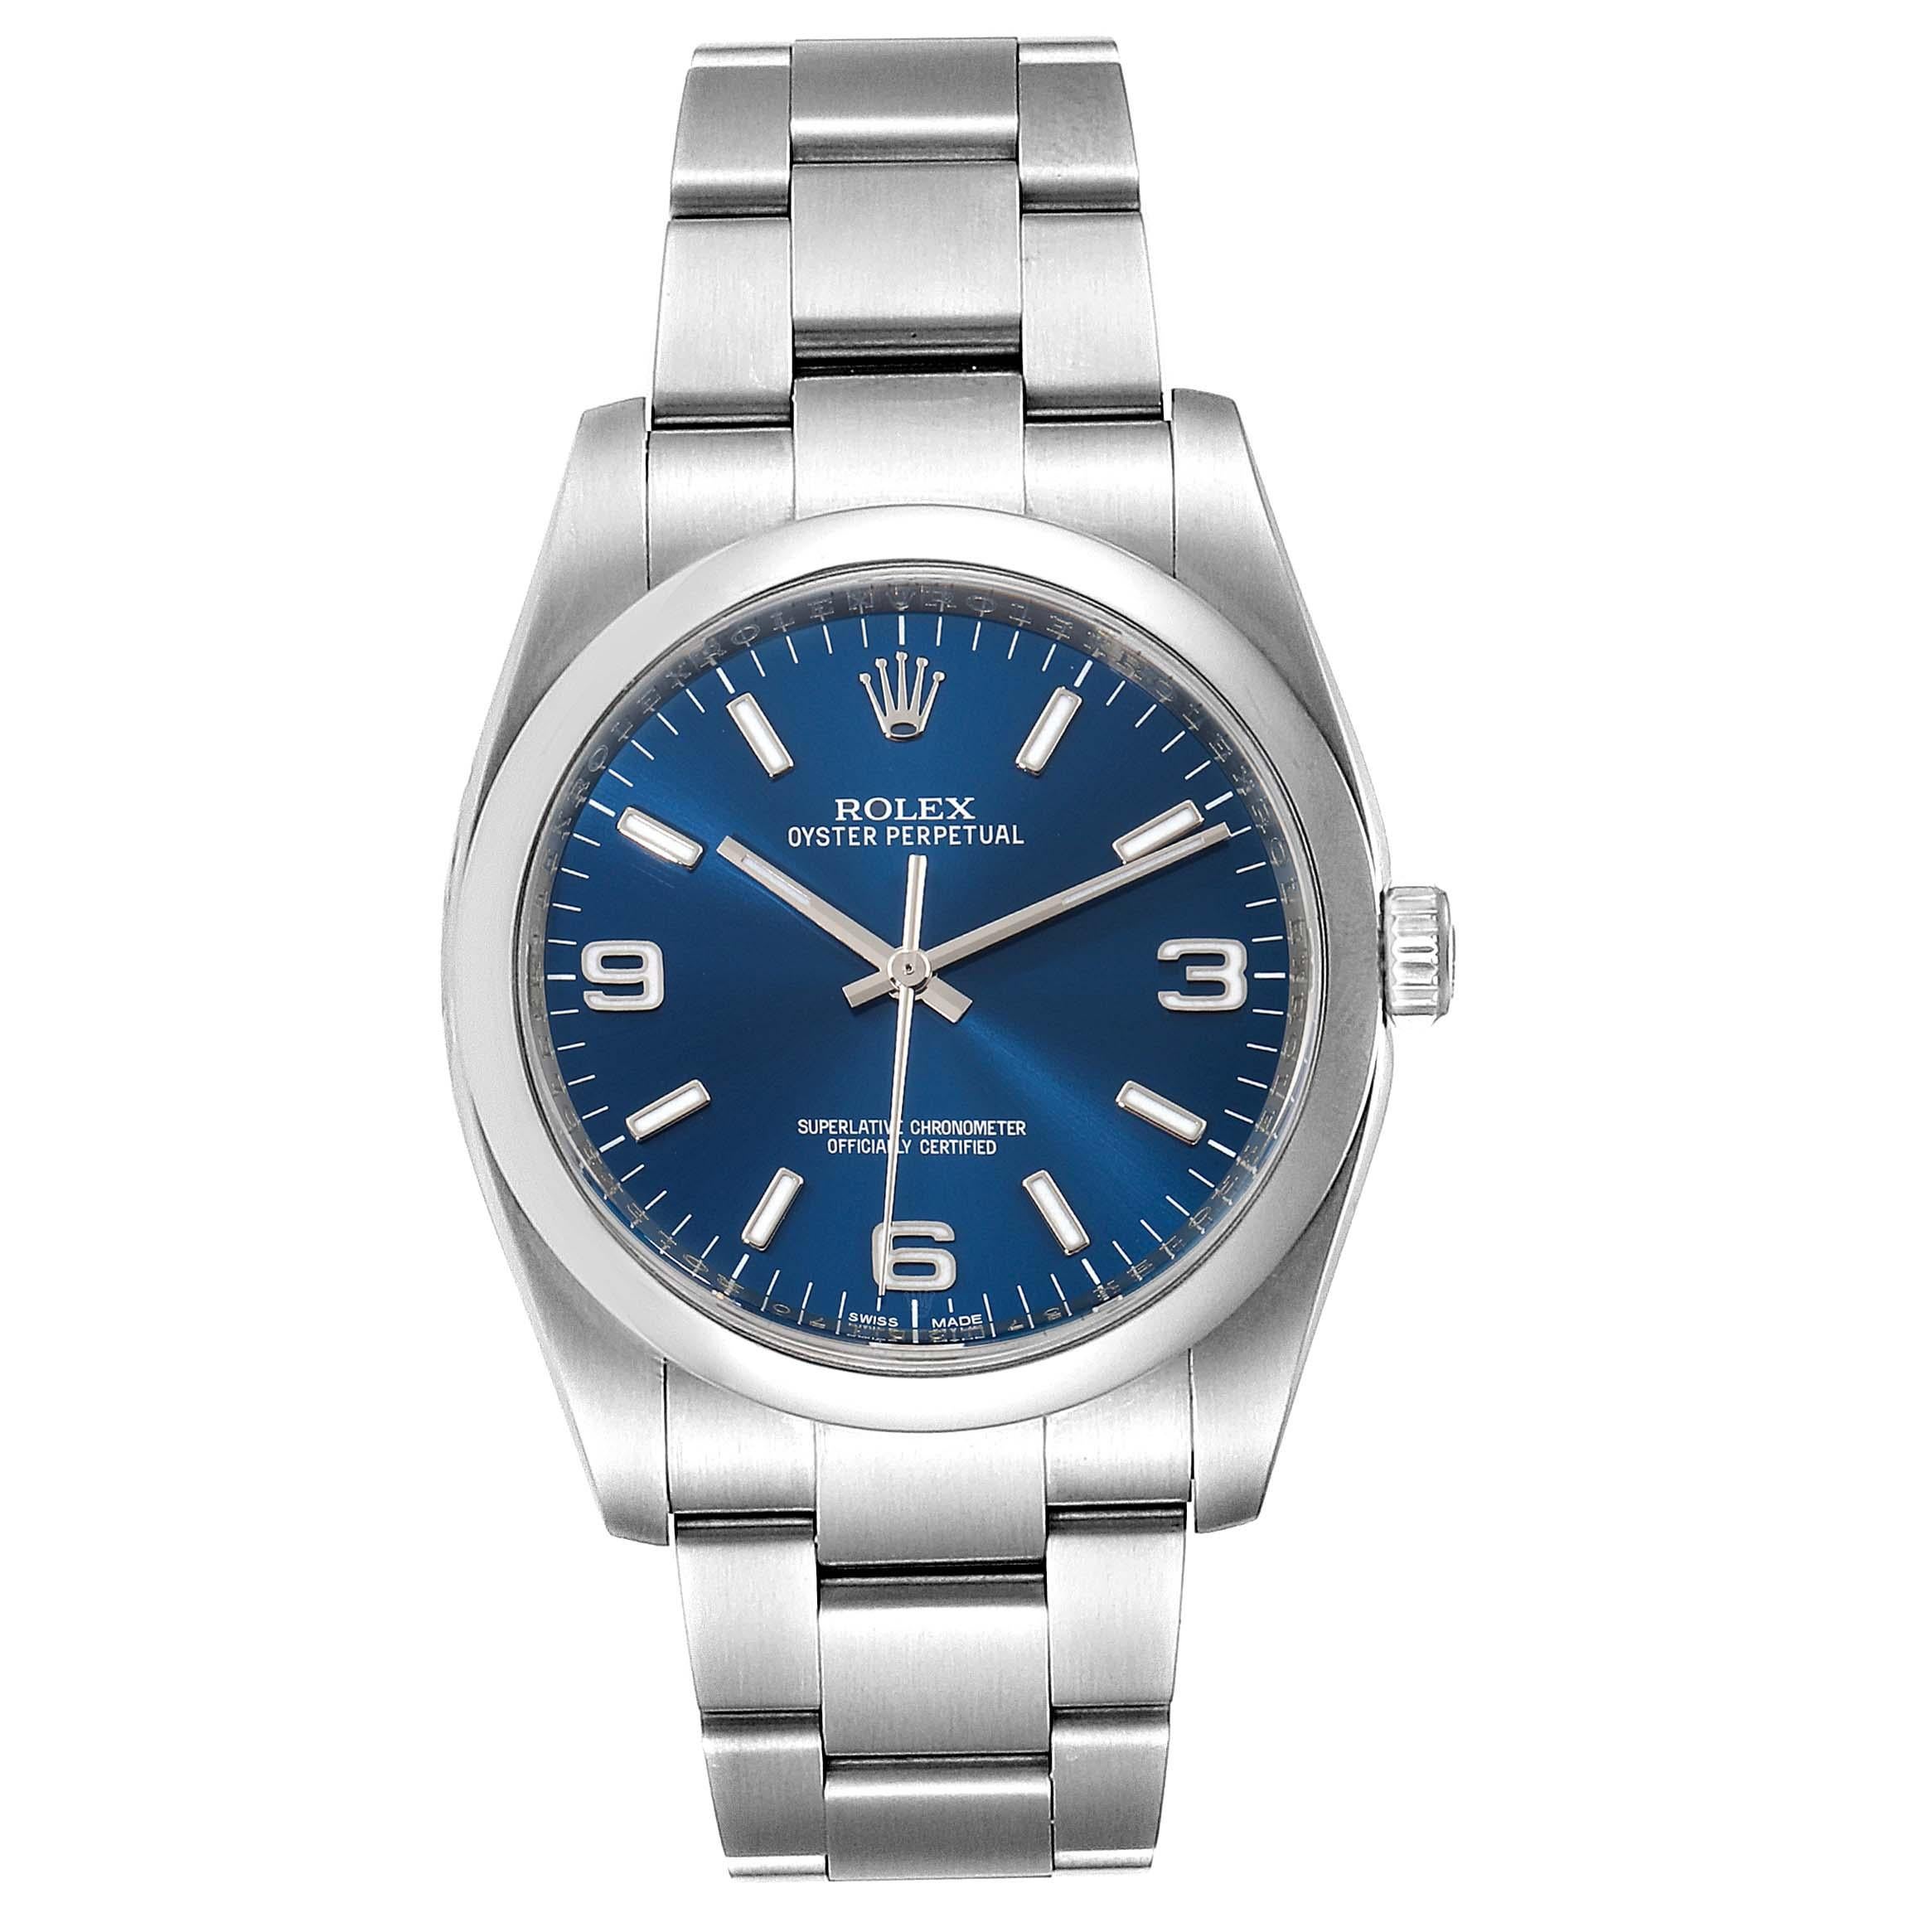 Rolex Oyster Perpetual Blue Dial Oyster Bracelet Mens Watch 116000. Officially certified chronometer self-winding movement. Stainless steel case 36.0 mm in diameter. Rolex logo on a crown. Stainless steel smooth domed bezel. Scratch resistant